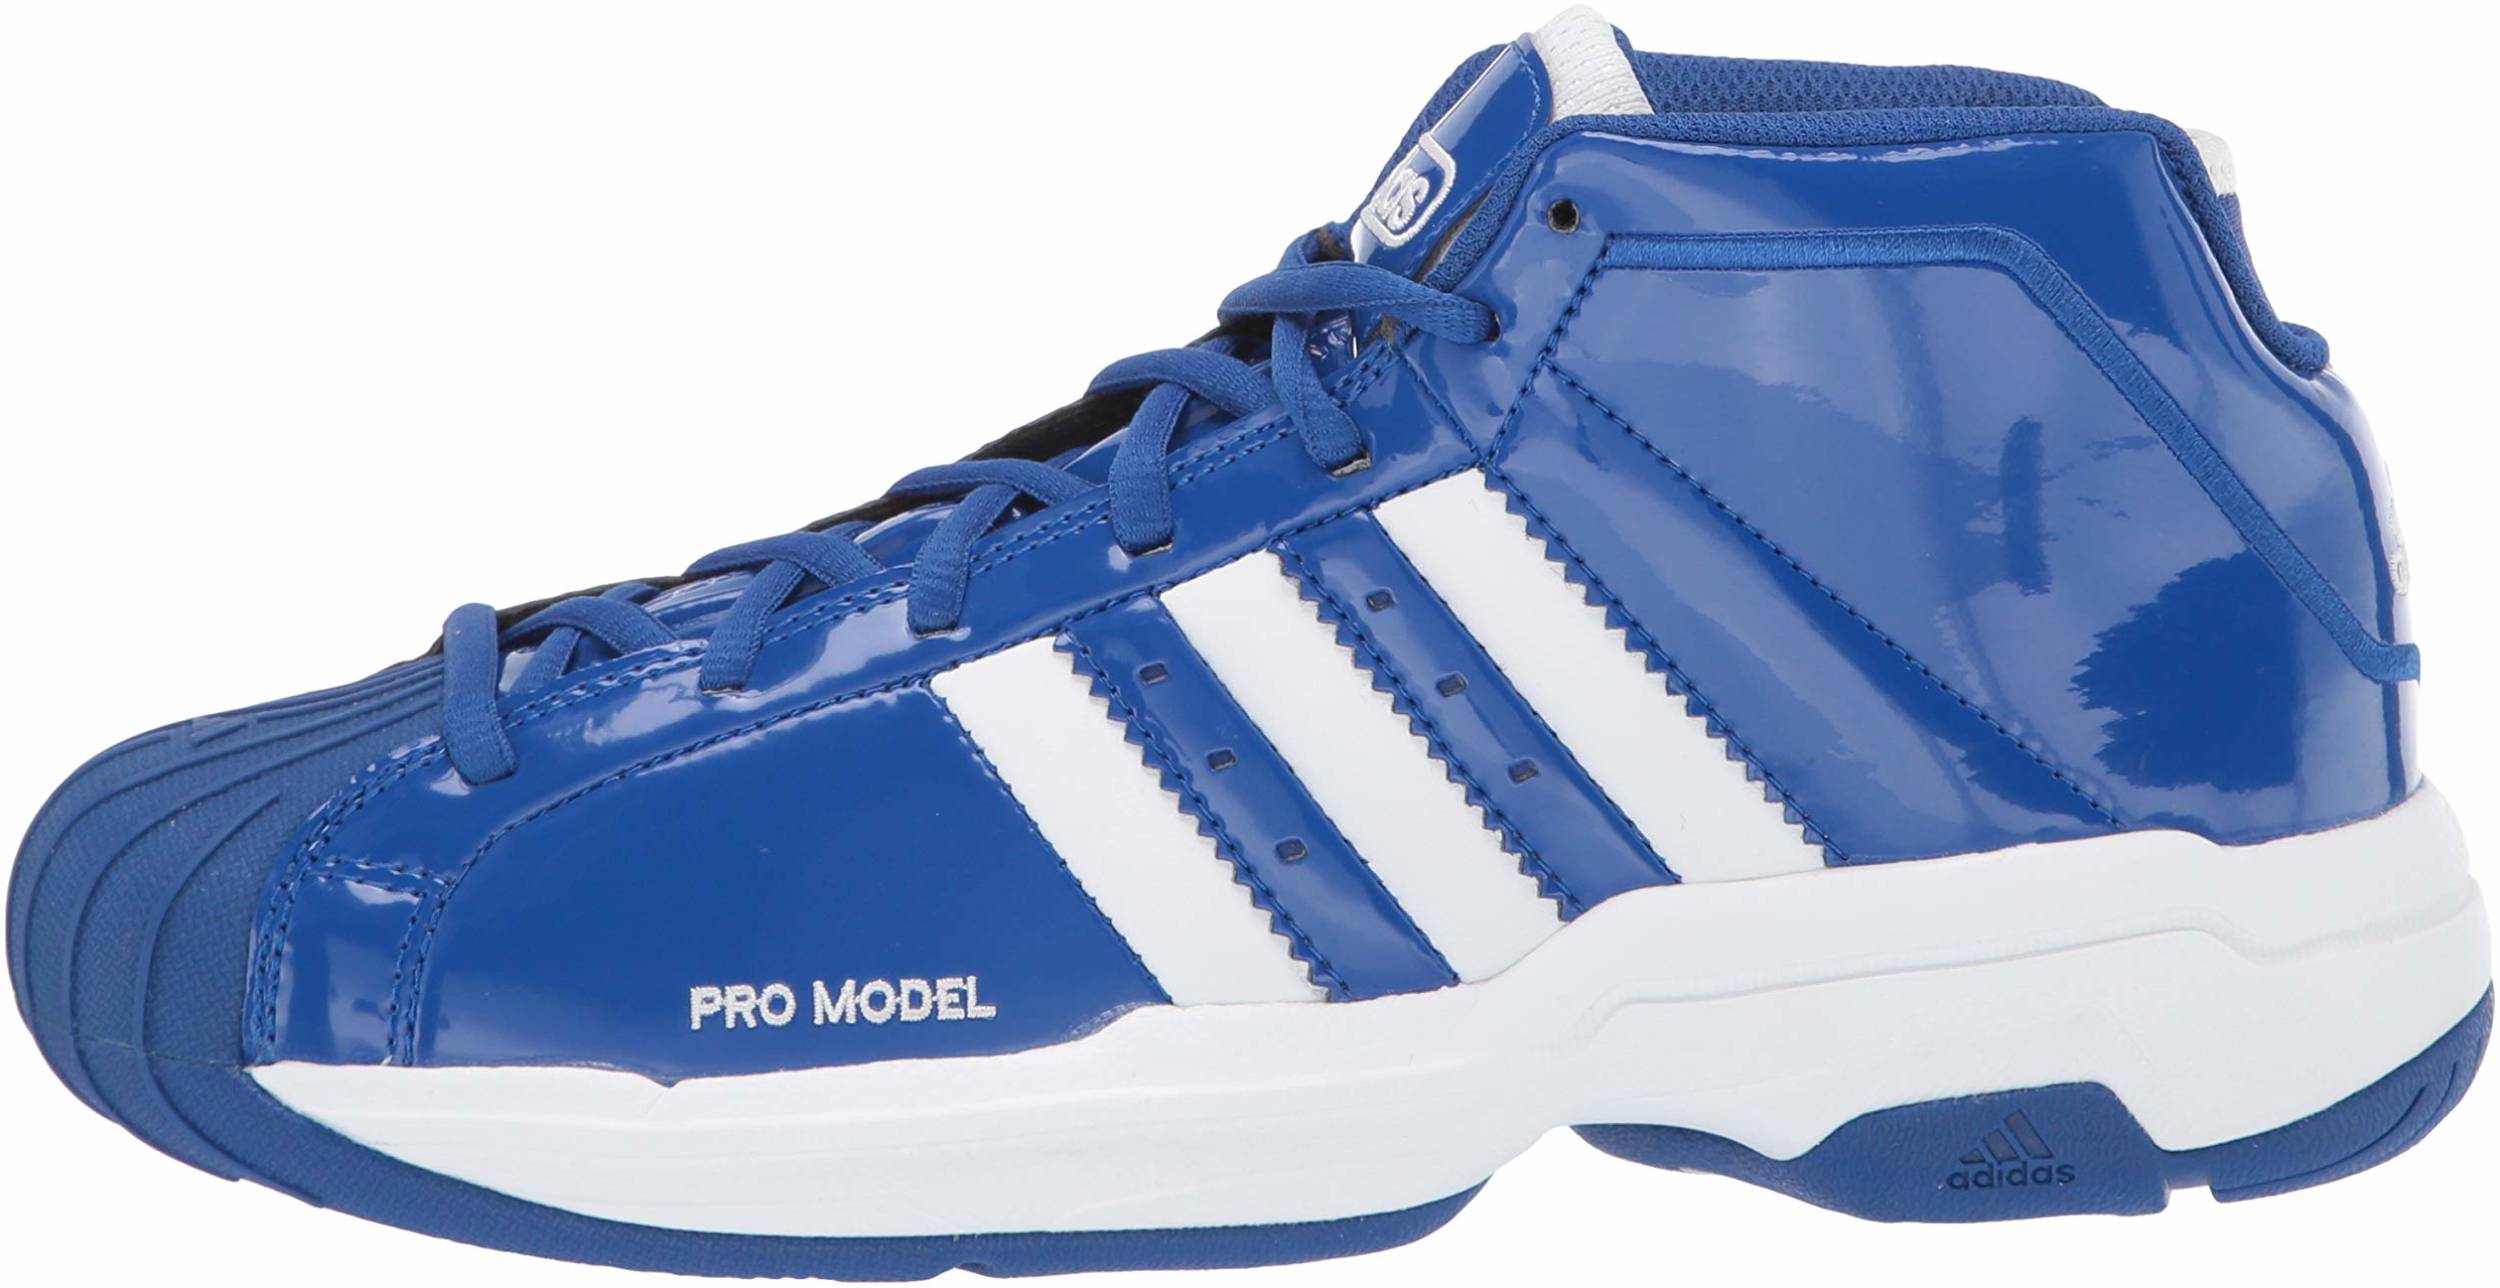 royal blue and white basketball shoes